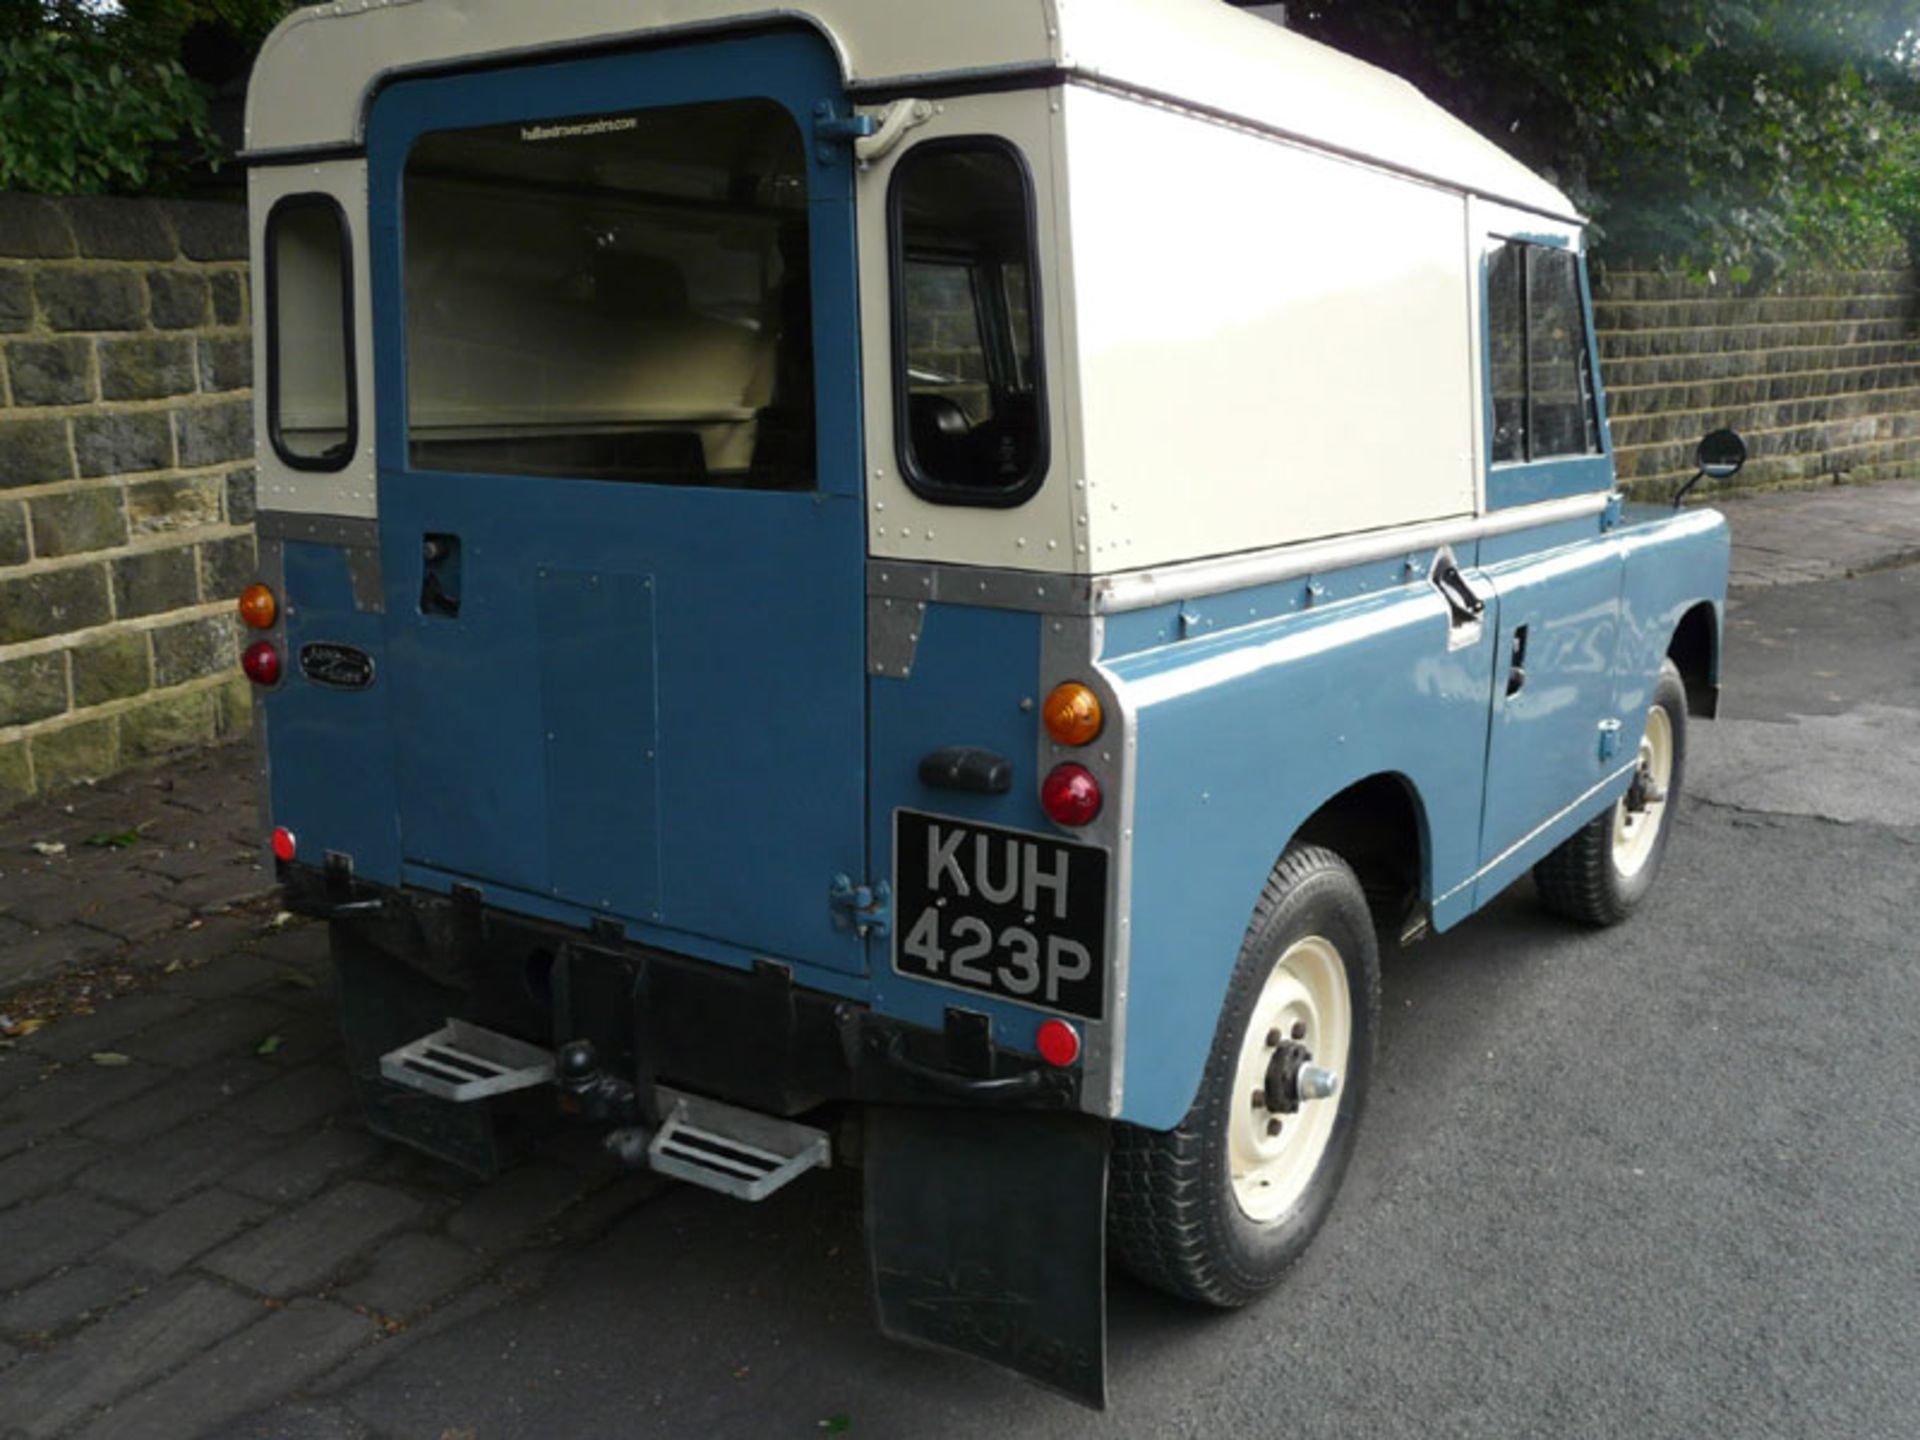 1975 Land Rover 88 Series III - Image 3 of 6